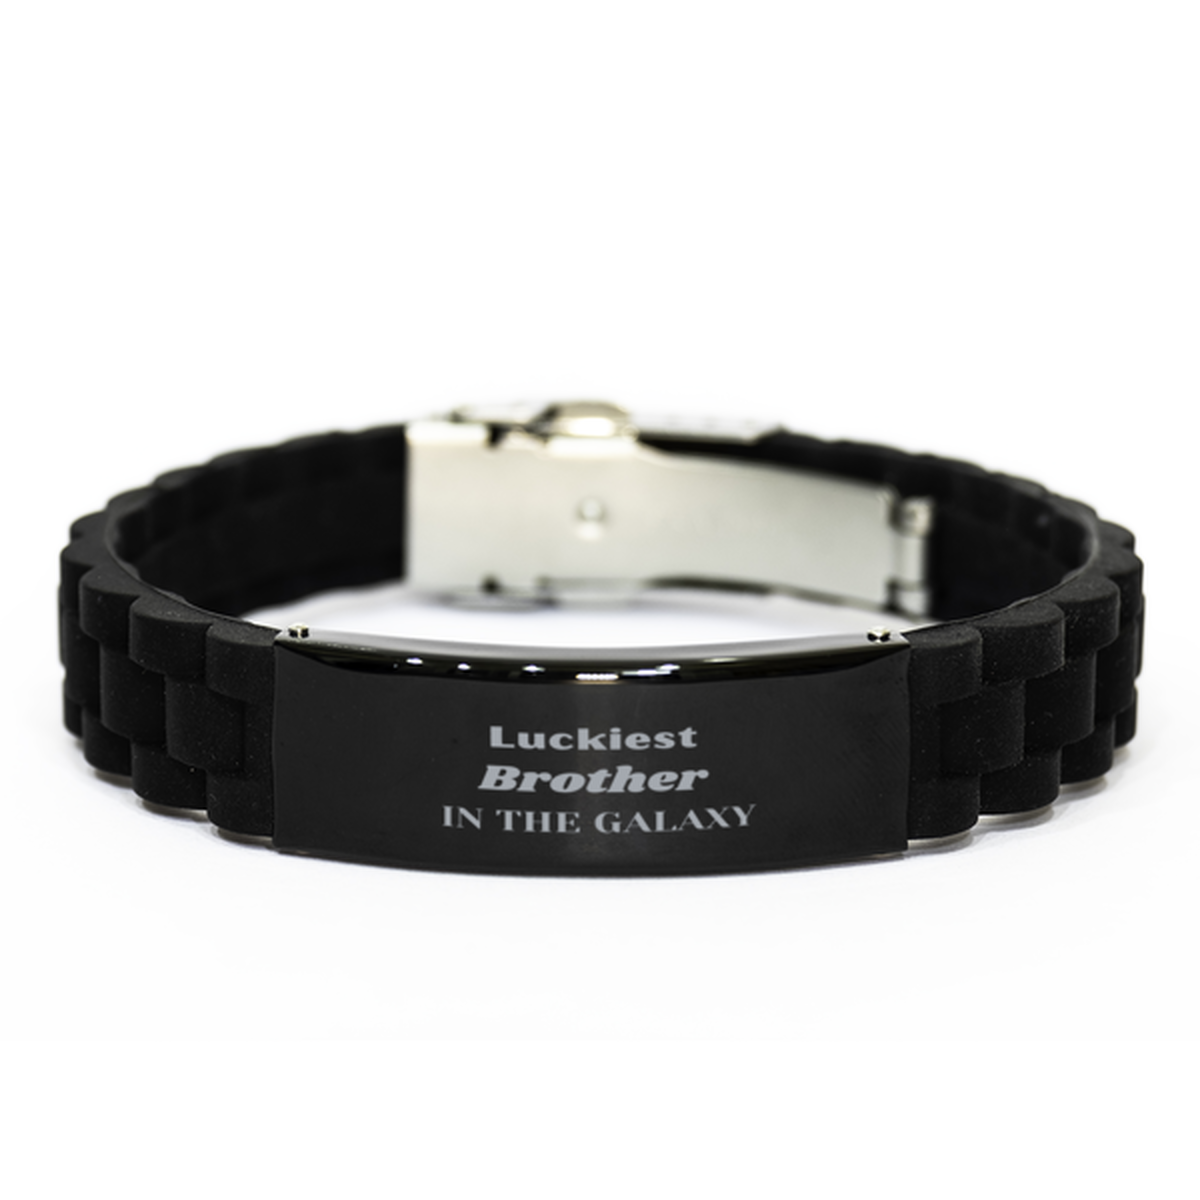 Luckiest Brother in the Galaxy, To My Brother Engraved Gifts, Christmas Brother Black Glidelock Clasp Bracelet Gifts, X-mas Birthday Unique Gifts For Brother Men Women